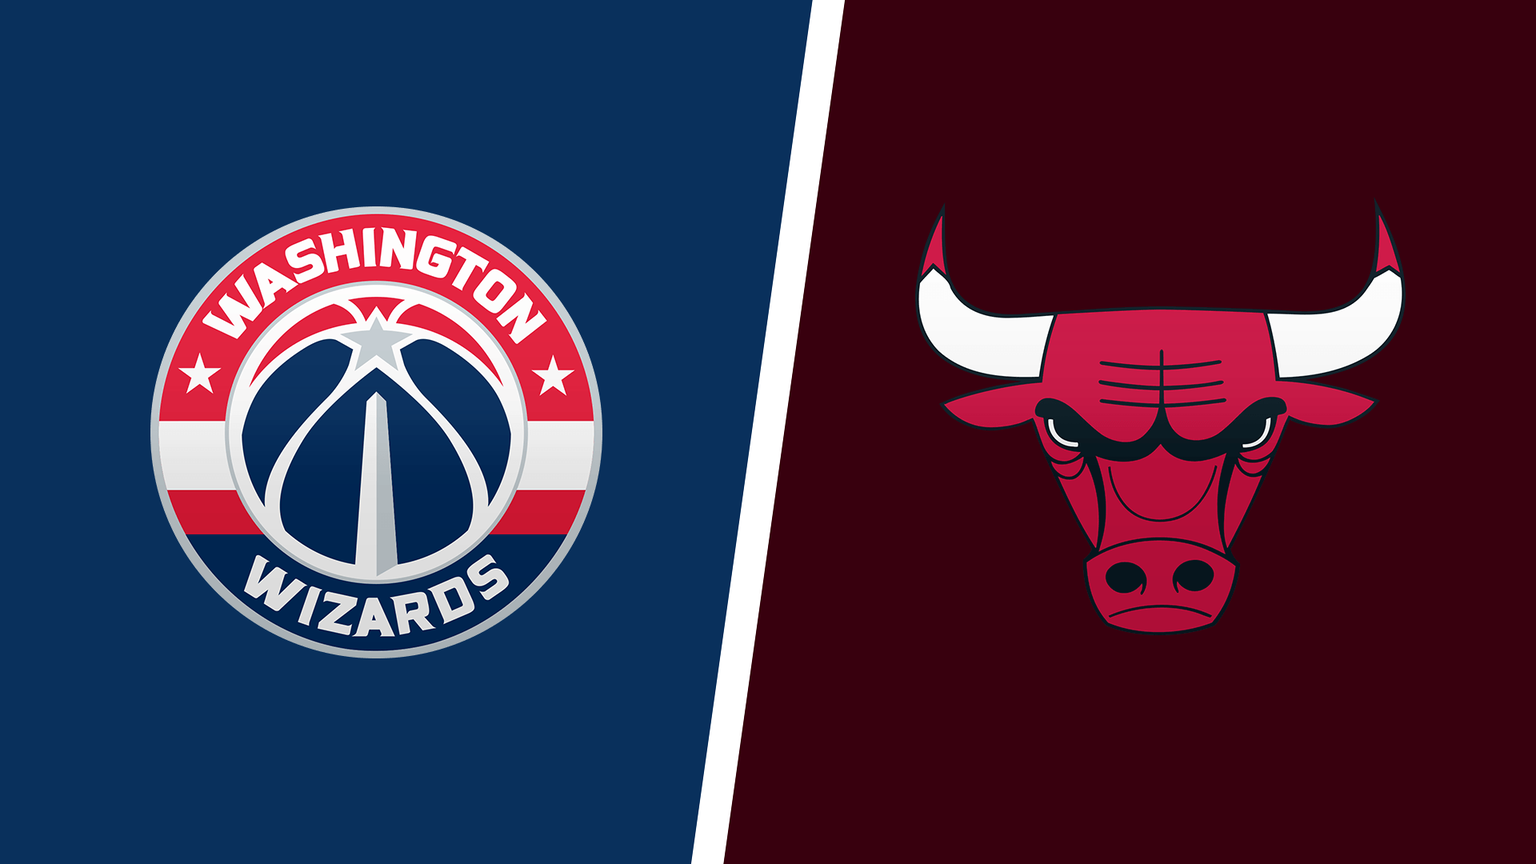 How to Watch Chicago Bulls vs. Washington Wizards Game Live Online on January 1, 2022 Streaming